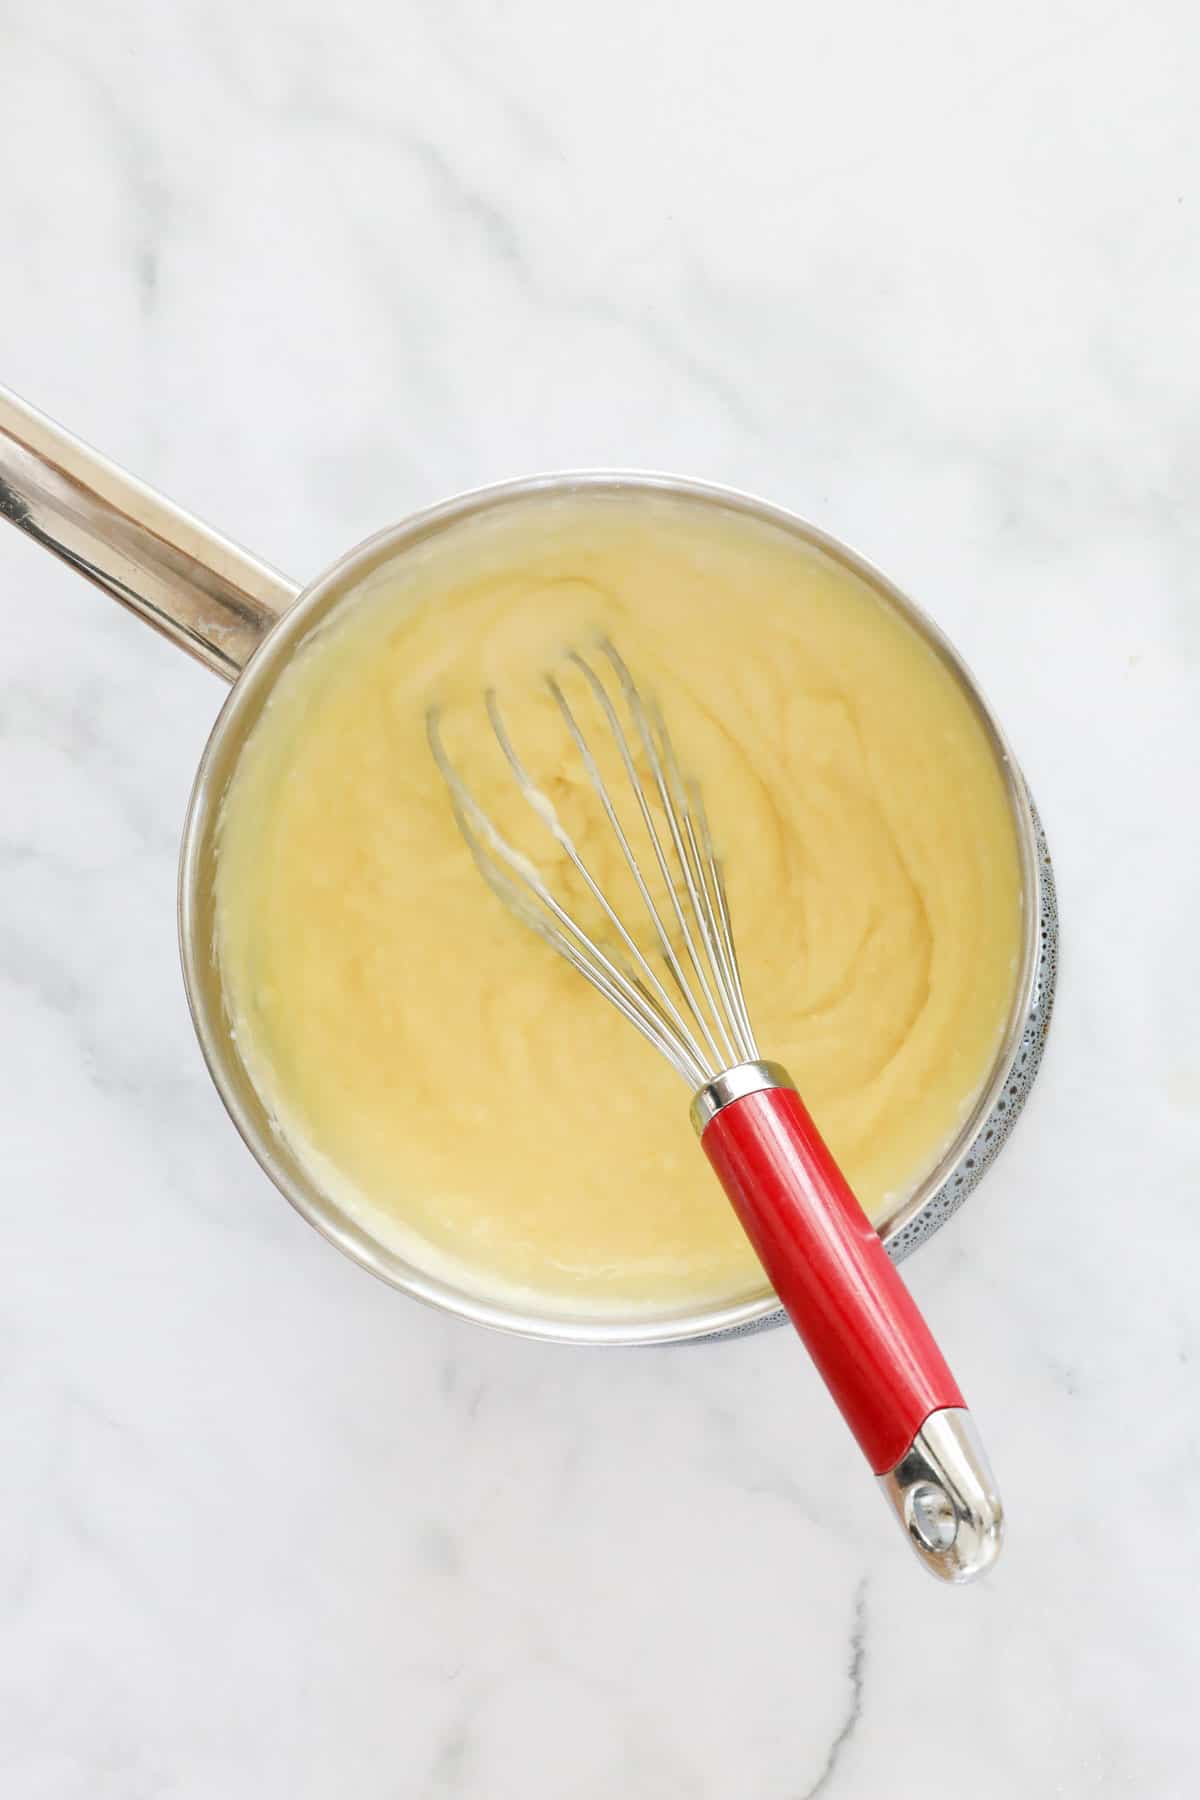 Custard being whisked in a saucepan.